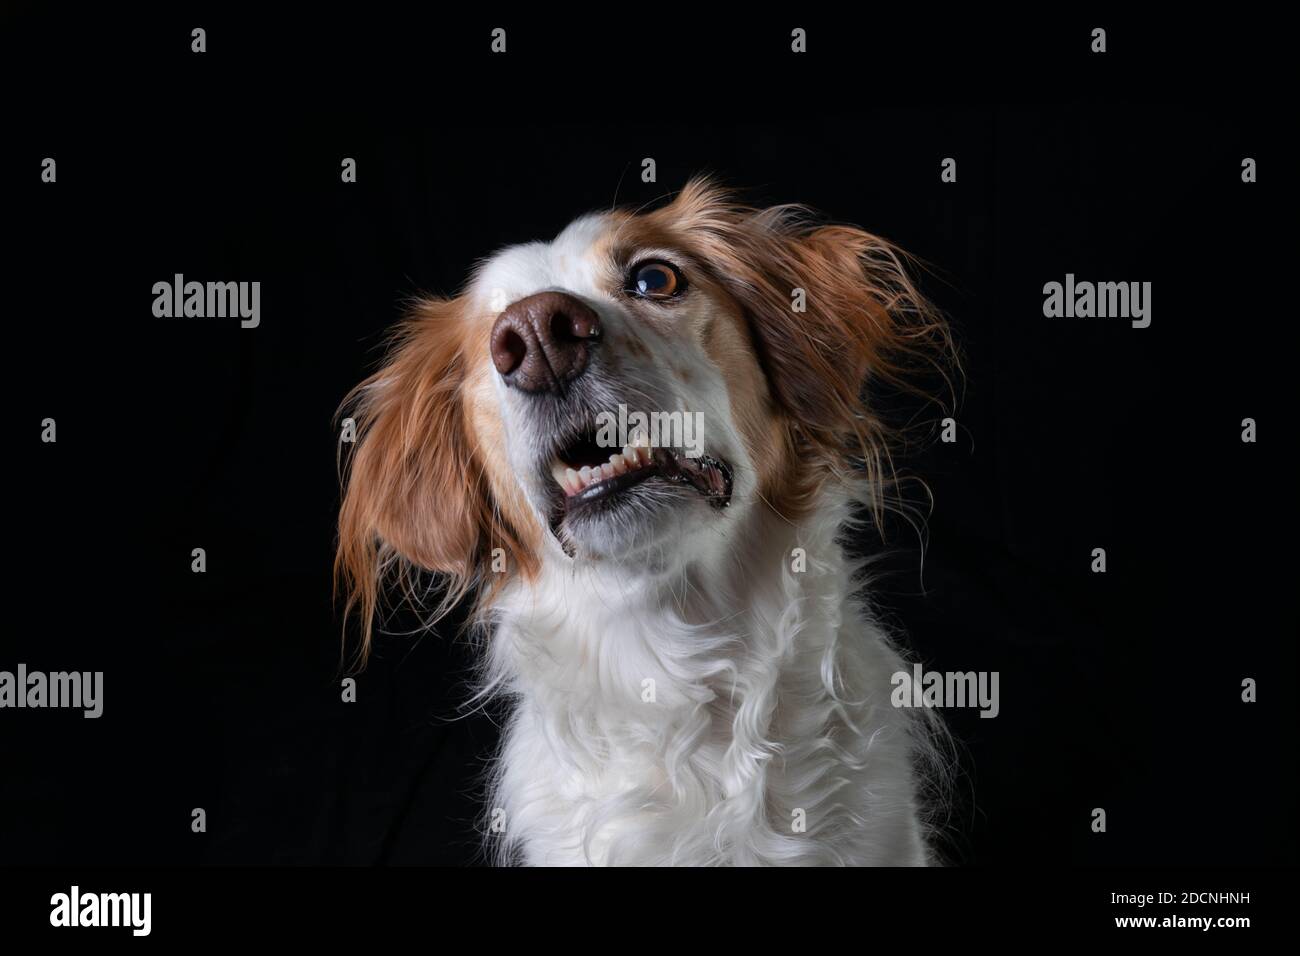 Studio portrait of a one-eyed orange and white Brittany Spaniel on black background tilting her head. Stock Photo